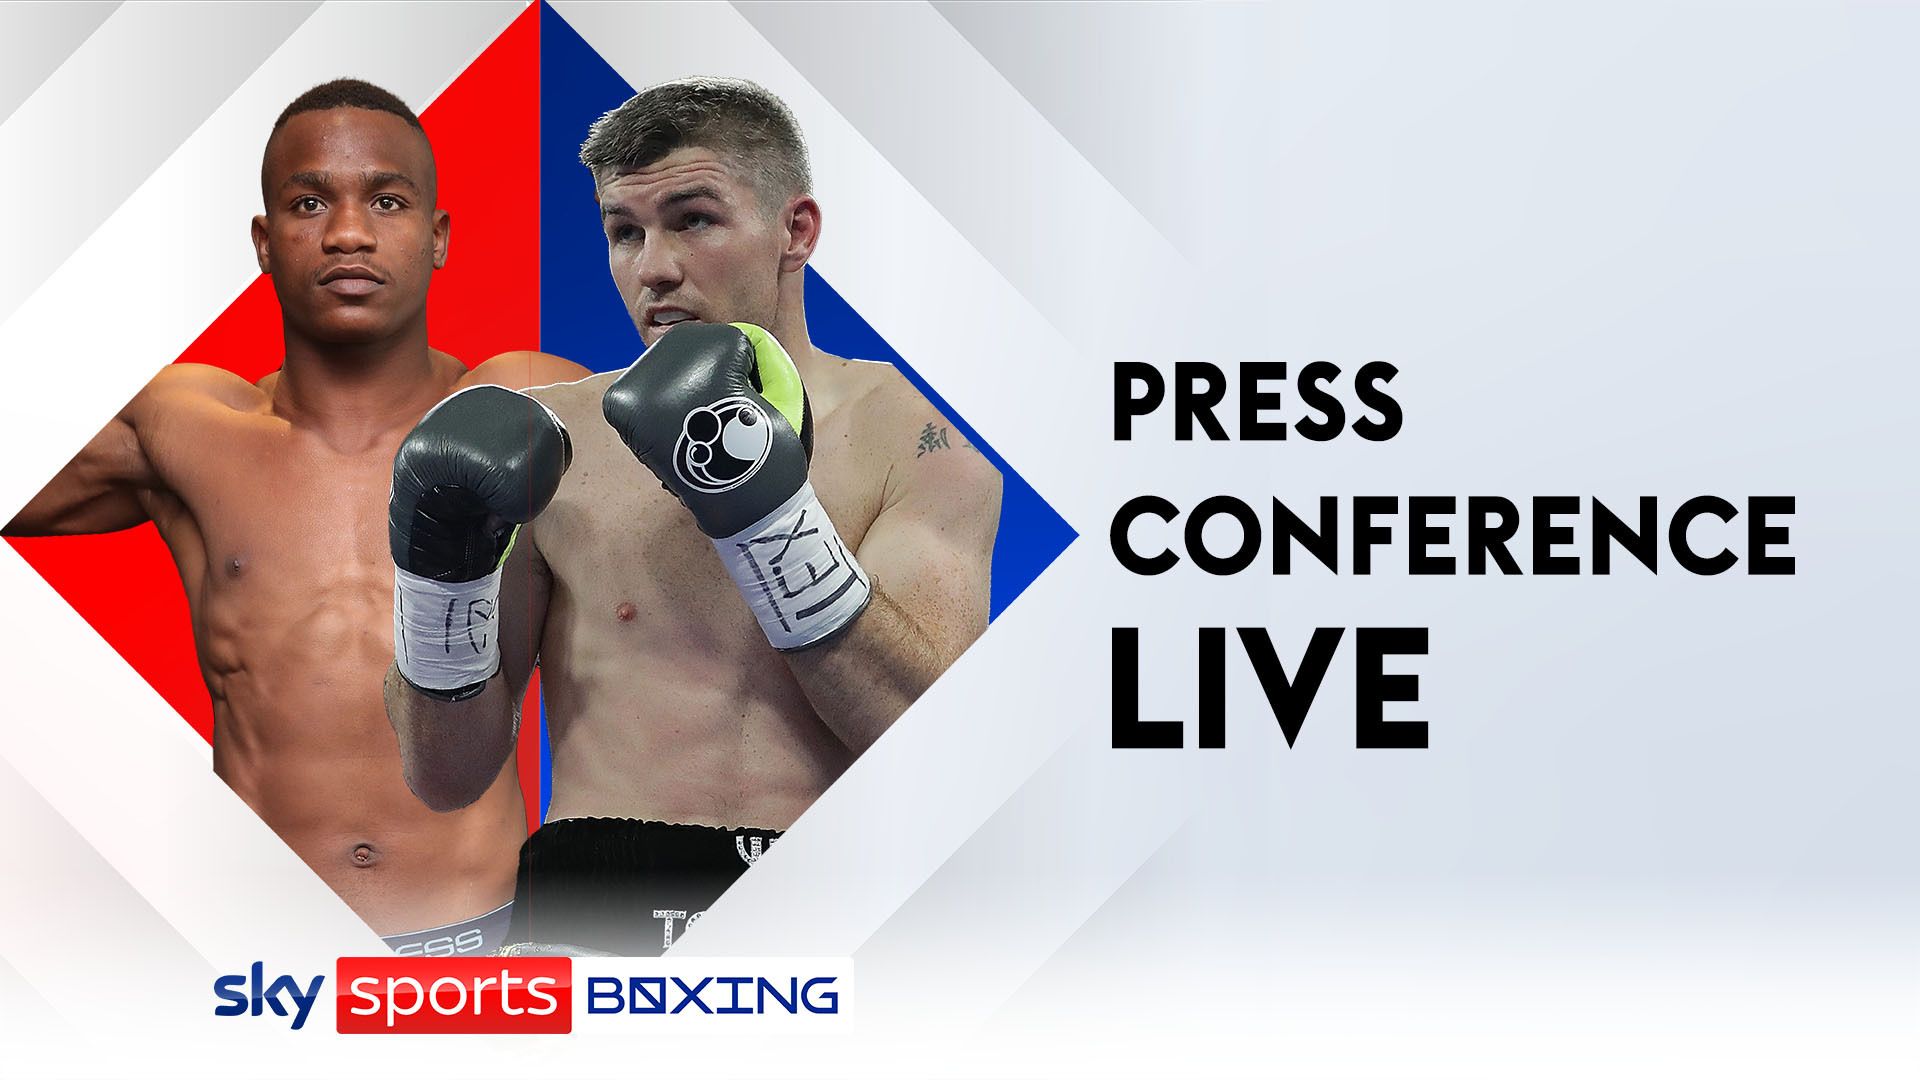 Smith vs Mwakinyo press conference from Anfield LIVE!